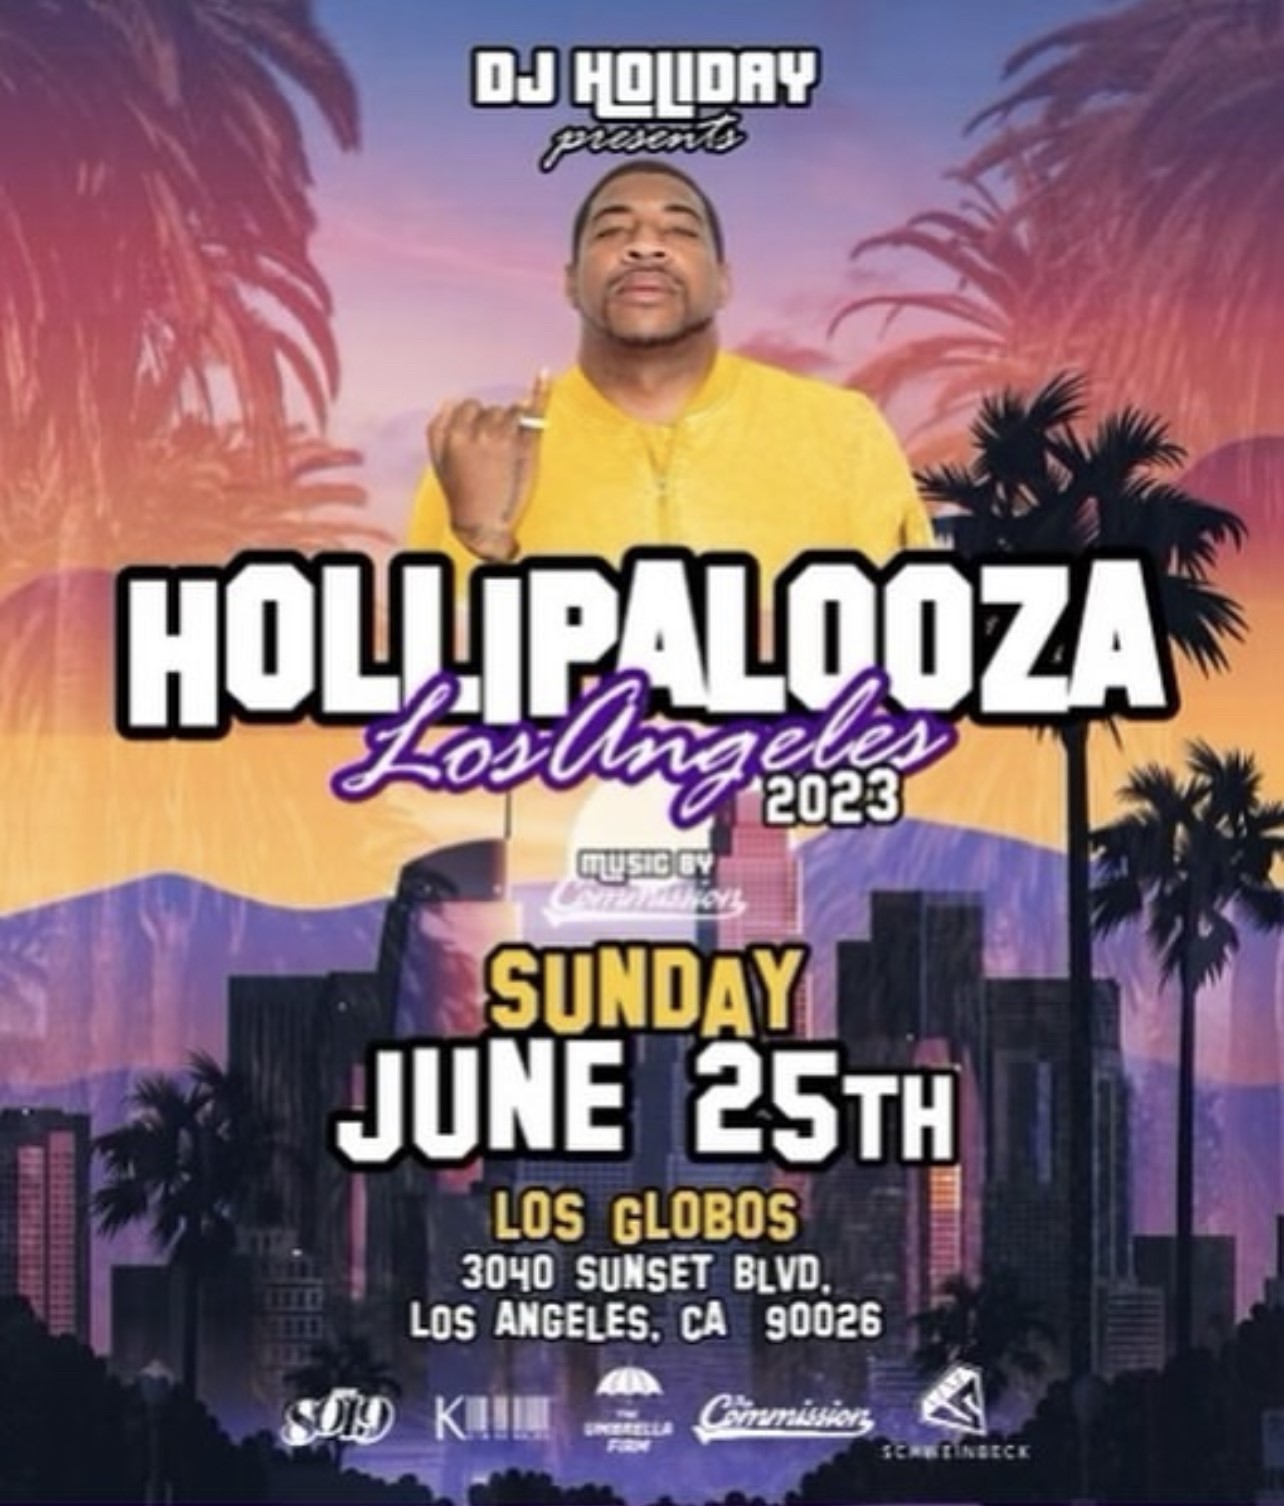 HOLLIPALOOZA WORLD TOUR LOS ANGELES, CALIFORNIA on Jun 25, 20:00@LOS GLOBOS - Buy tickets and Get information on TICKETS tickets.bhglabel.com